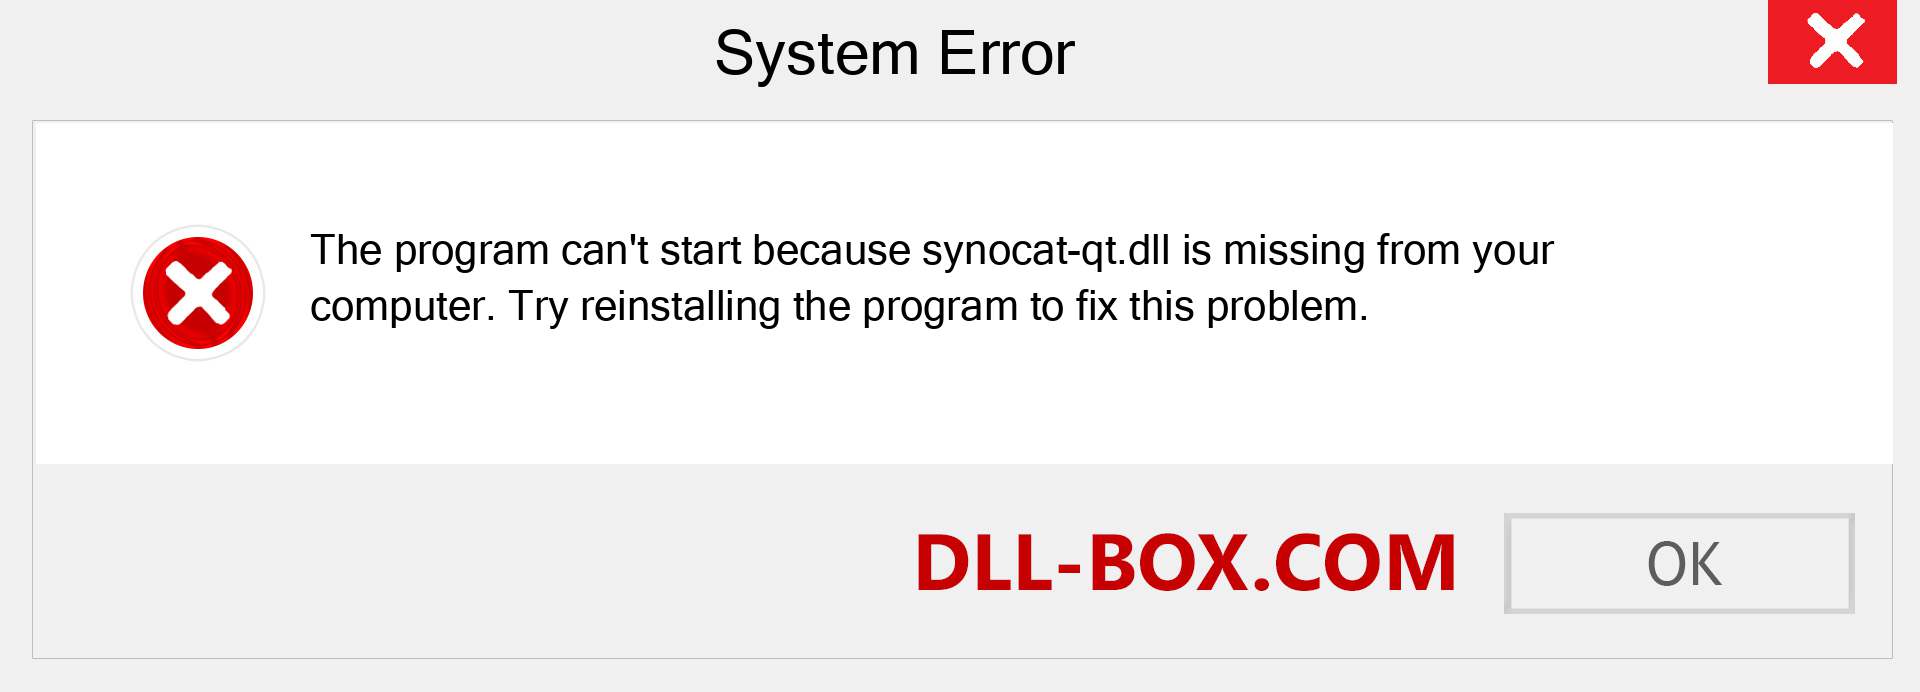  synocat-qt.dll file is missing?. Download for Windows 7, 8, 10 - Fix  synocat-qt dll Missing Error on Windows, photos, images